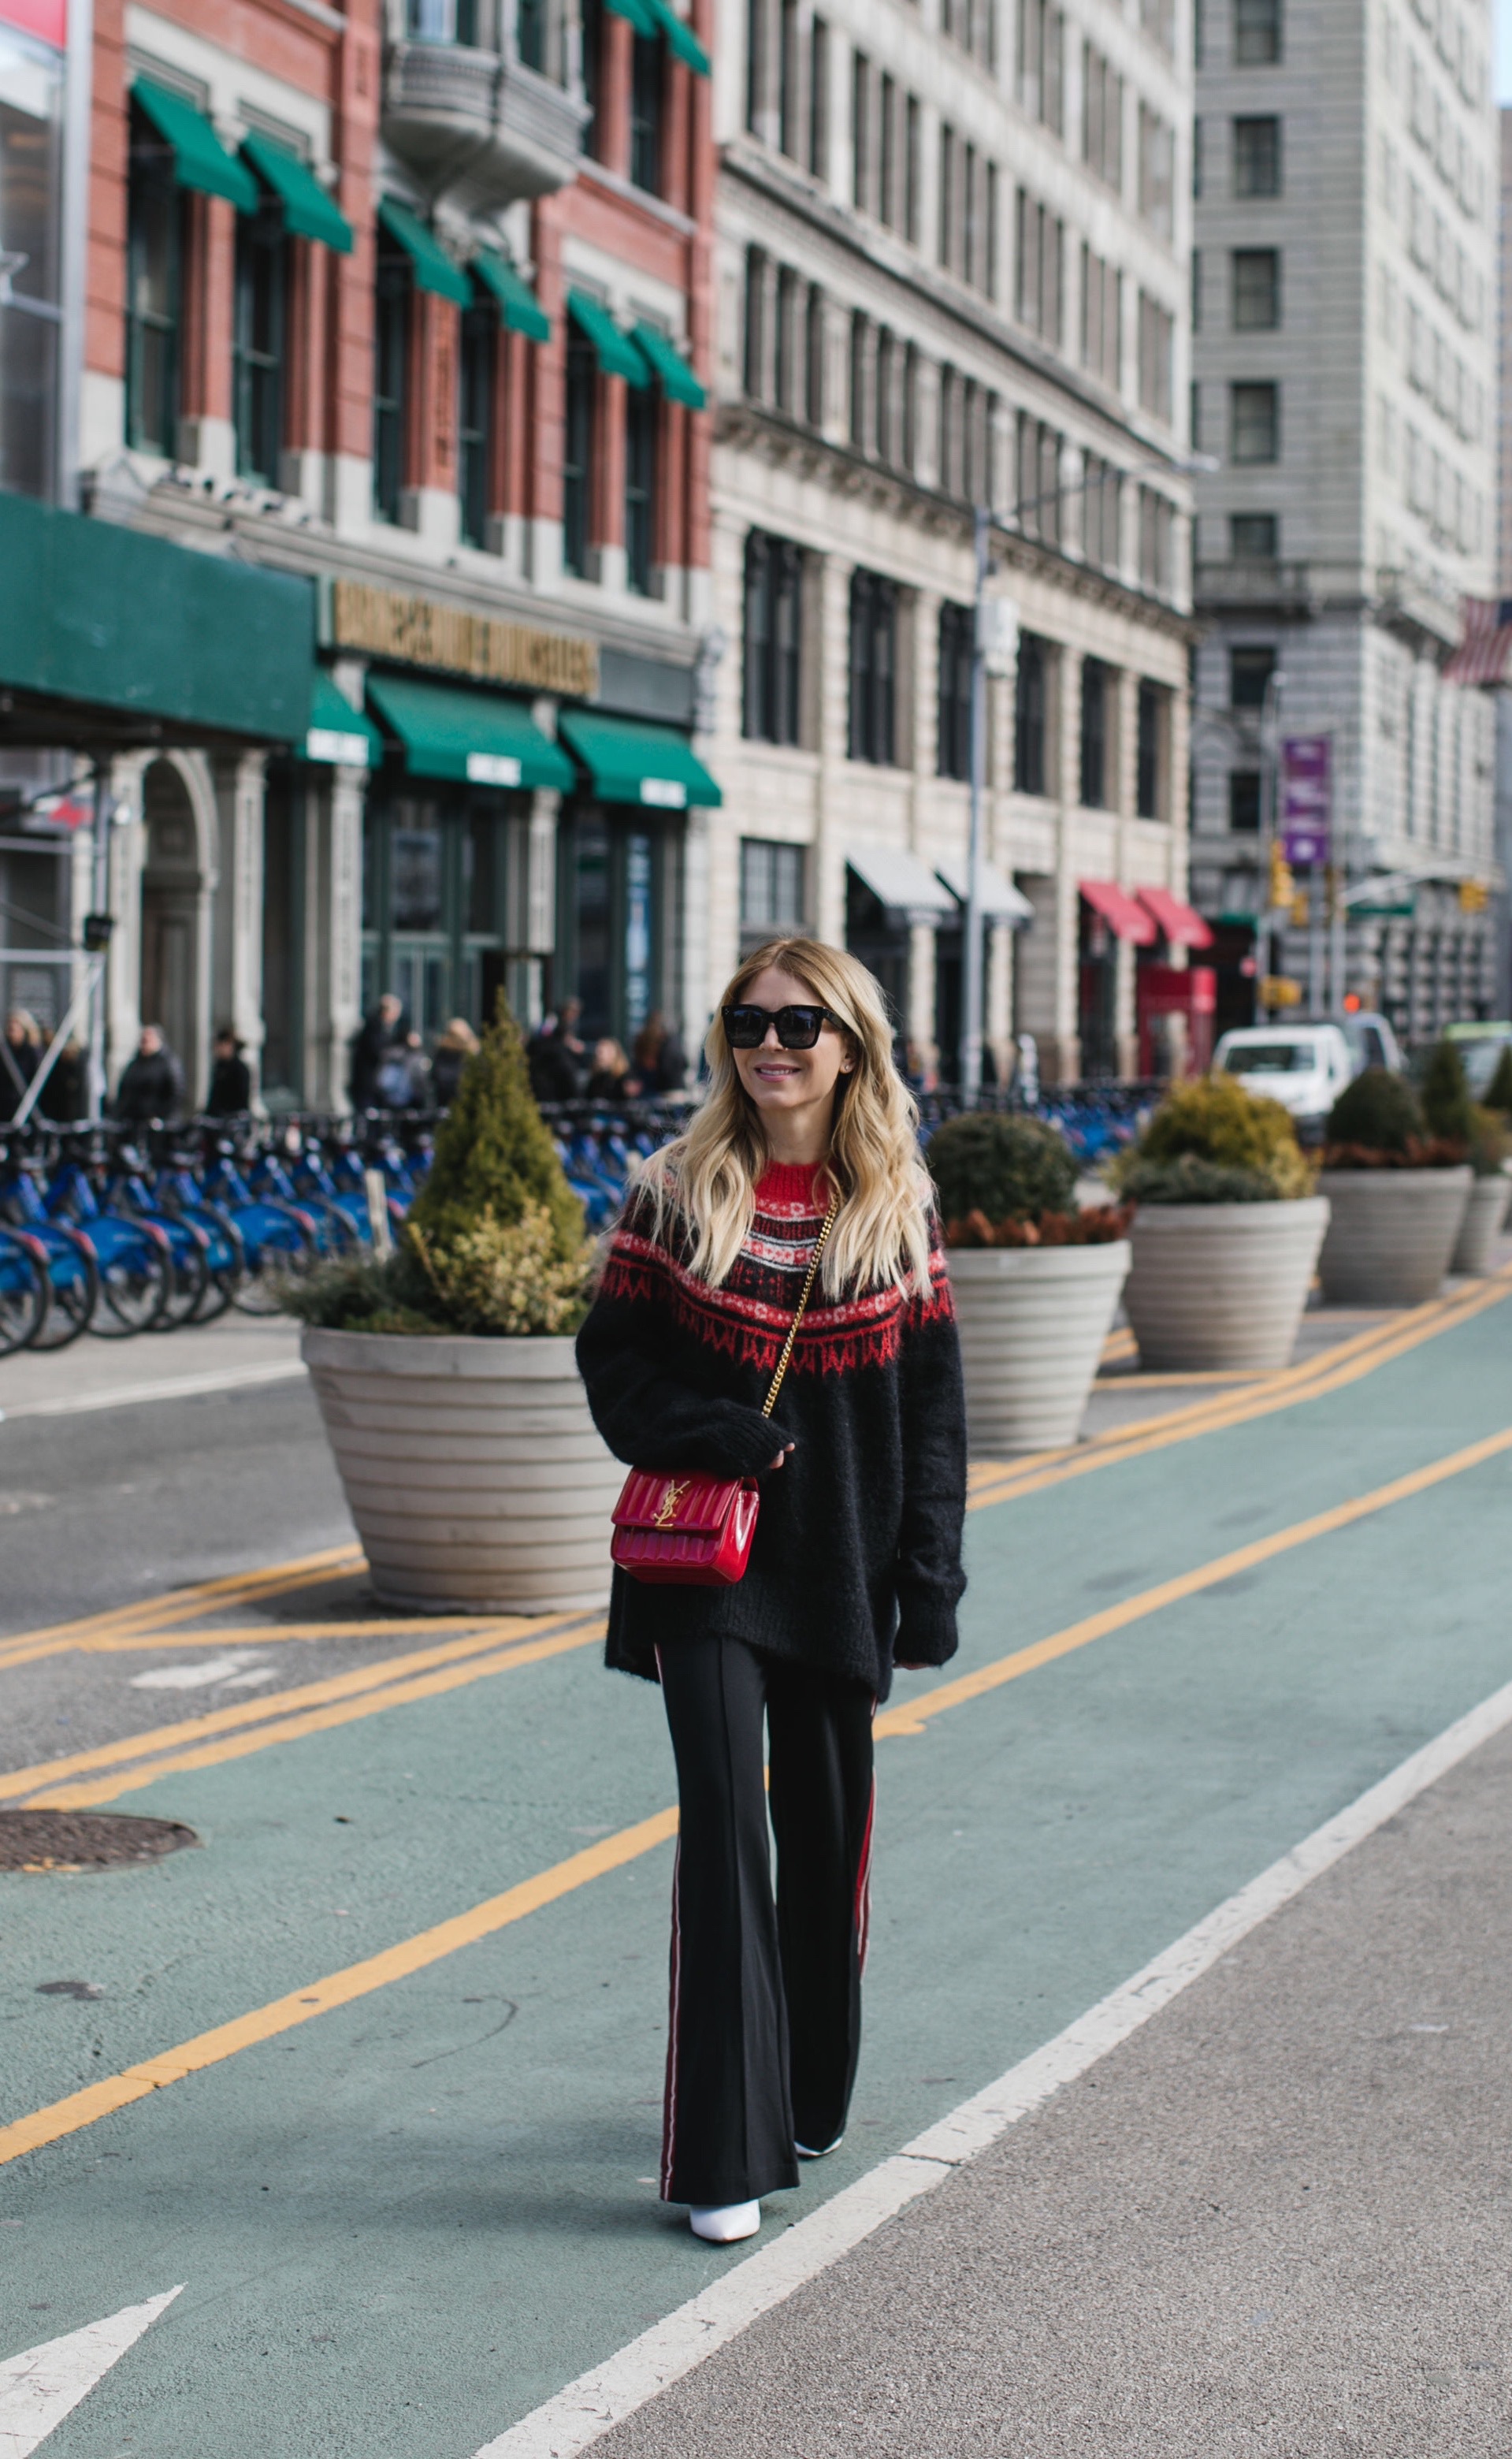 Red and black fair isle sweater, H&M fair isle sweater, red saint laurent bag, www.abouttheoutfits.com, abouttheoutfits